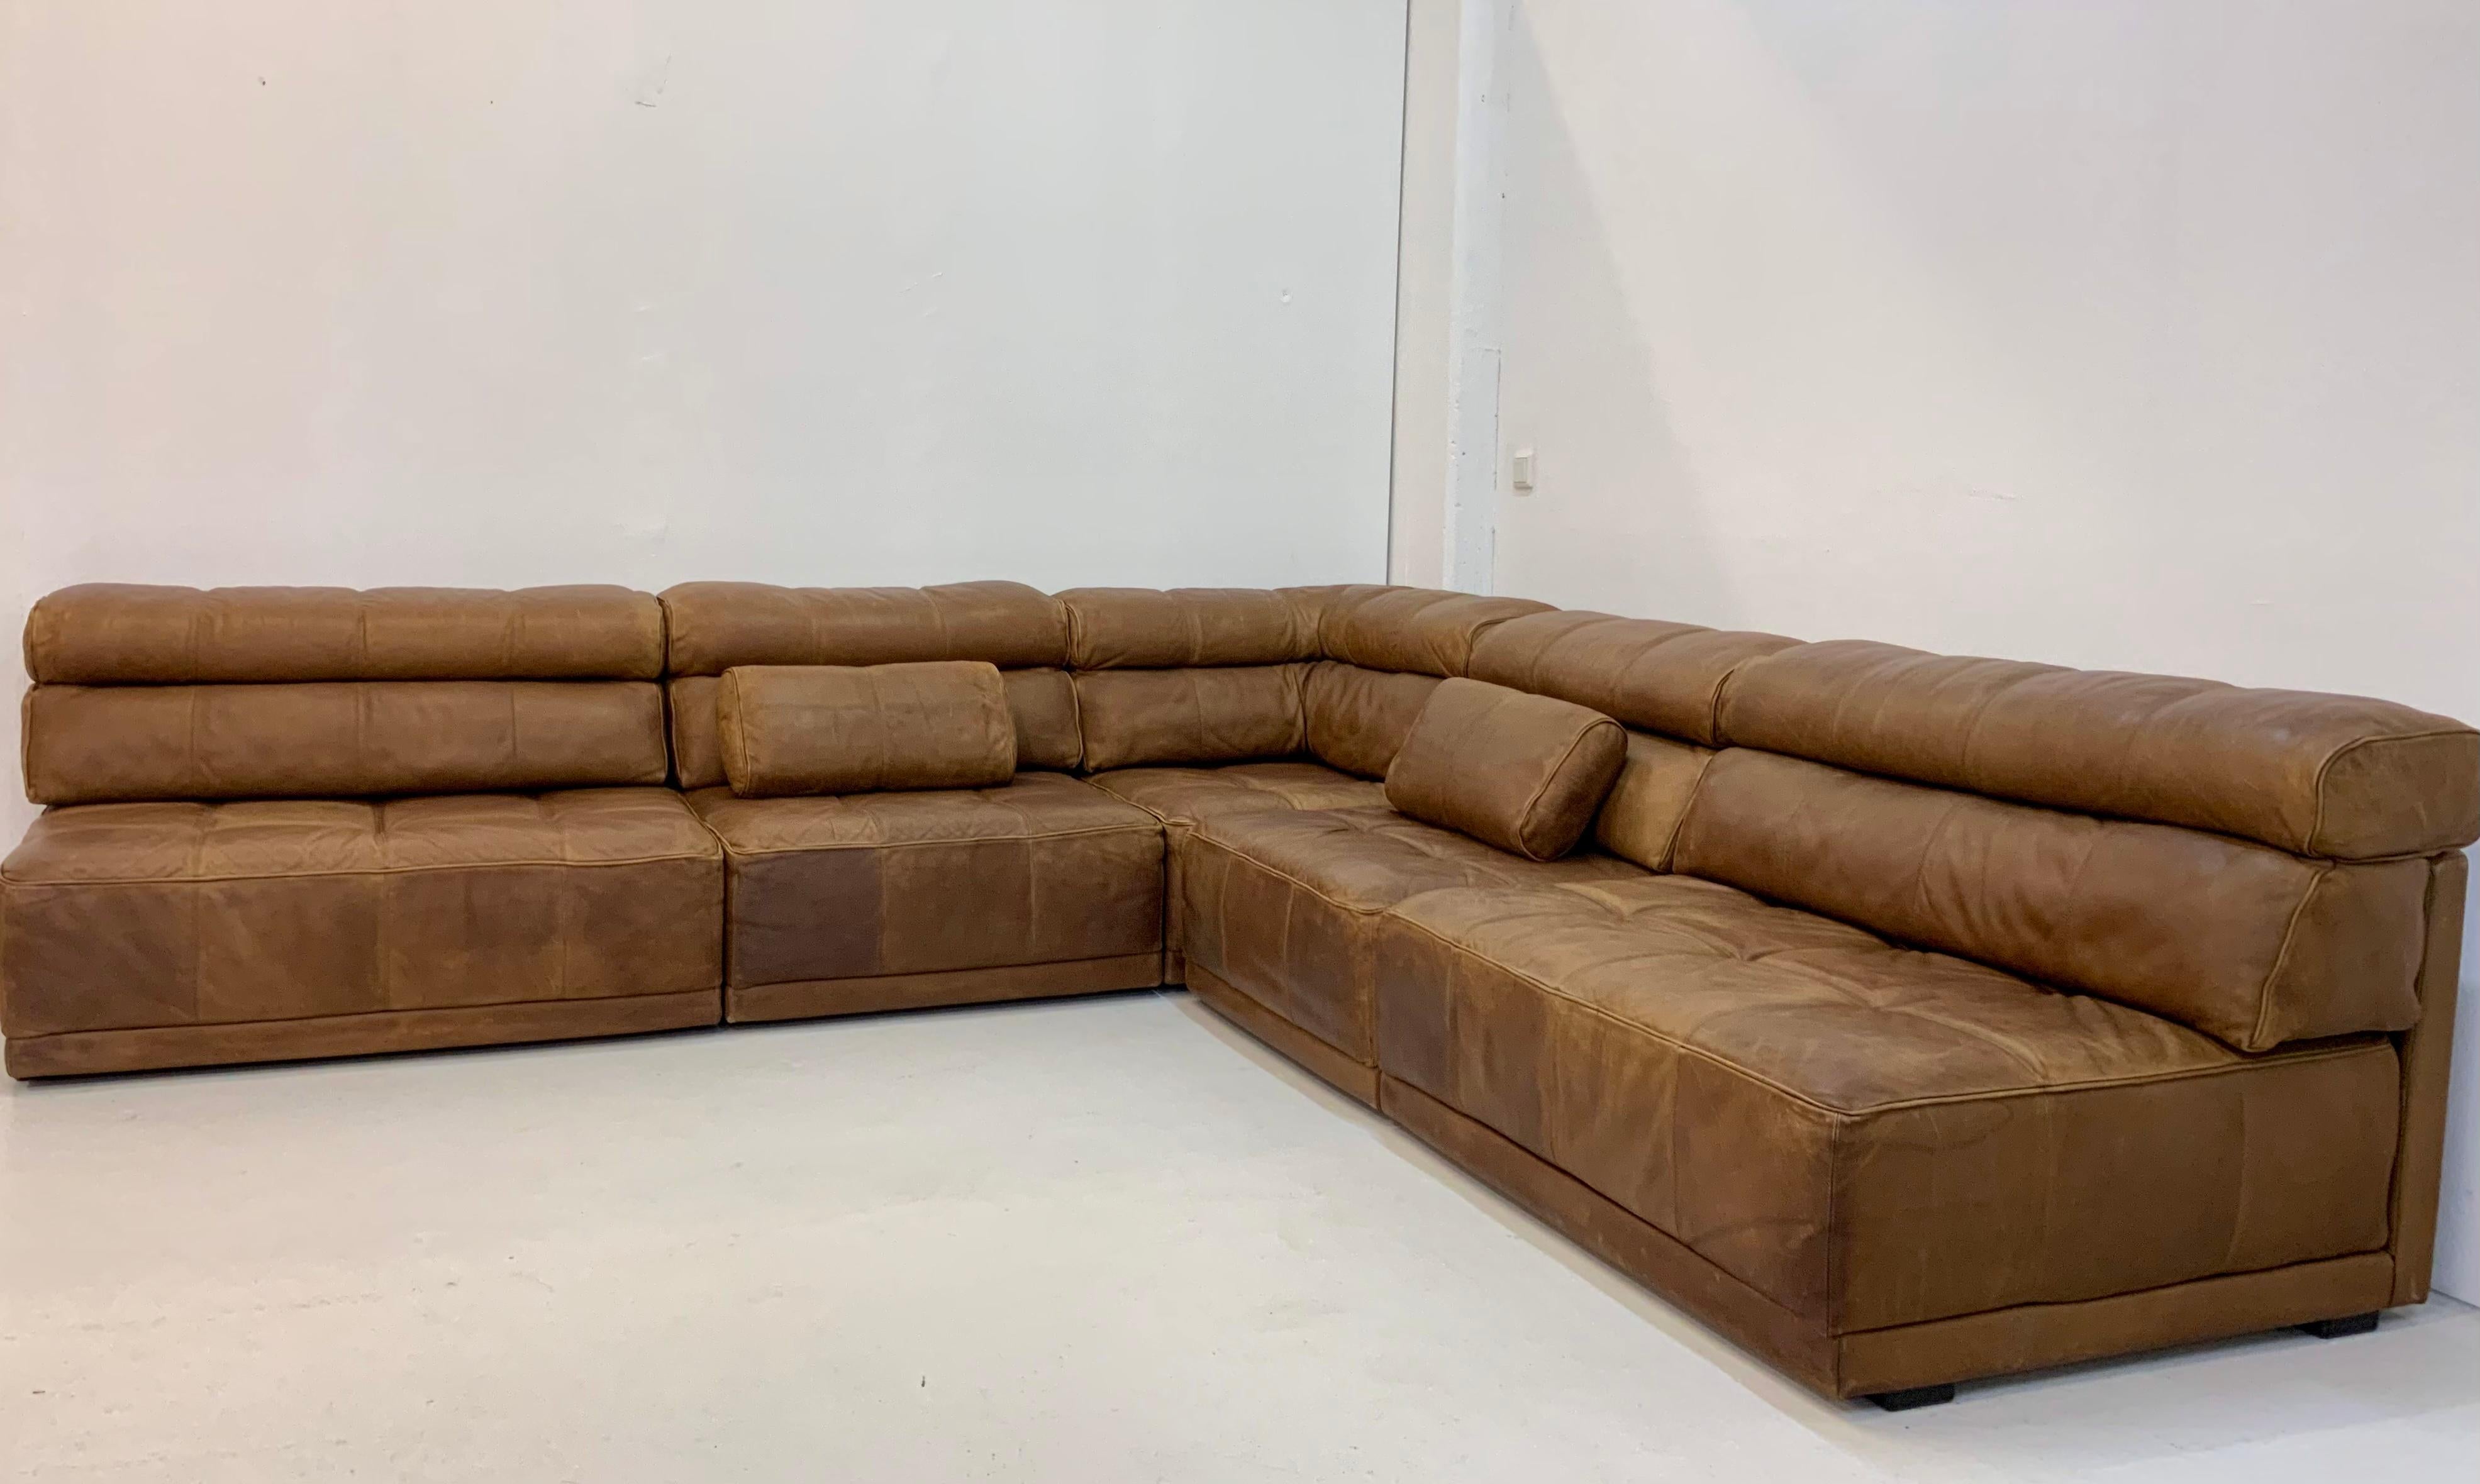 70s style couch